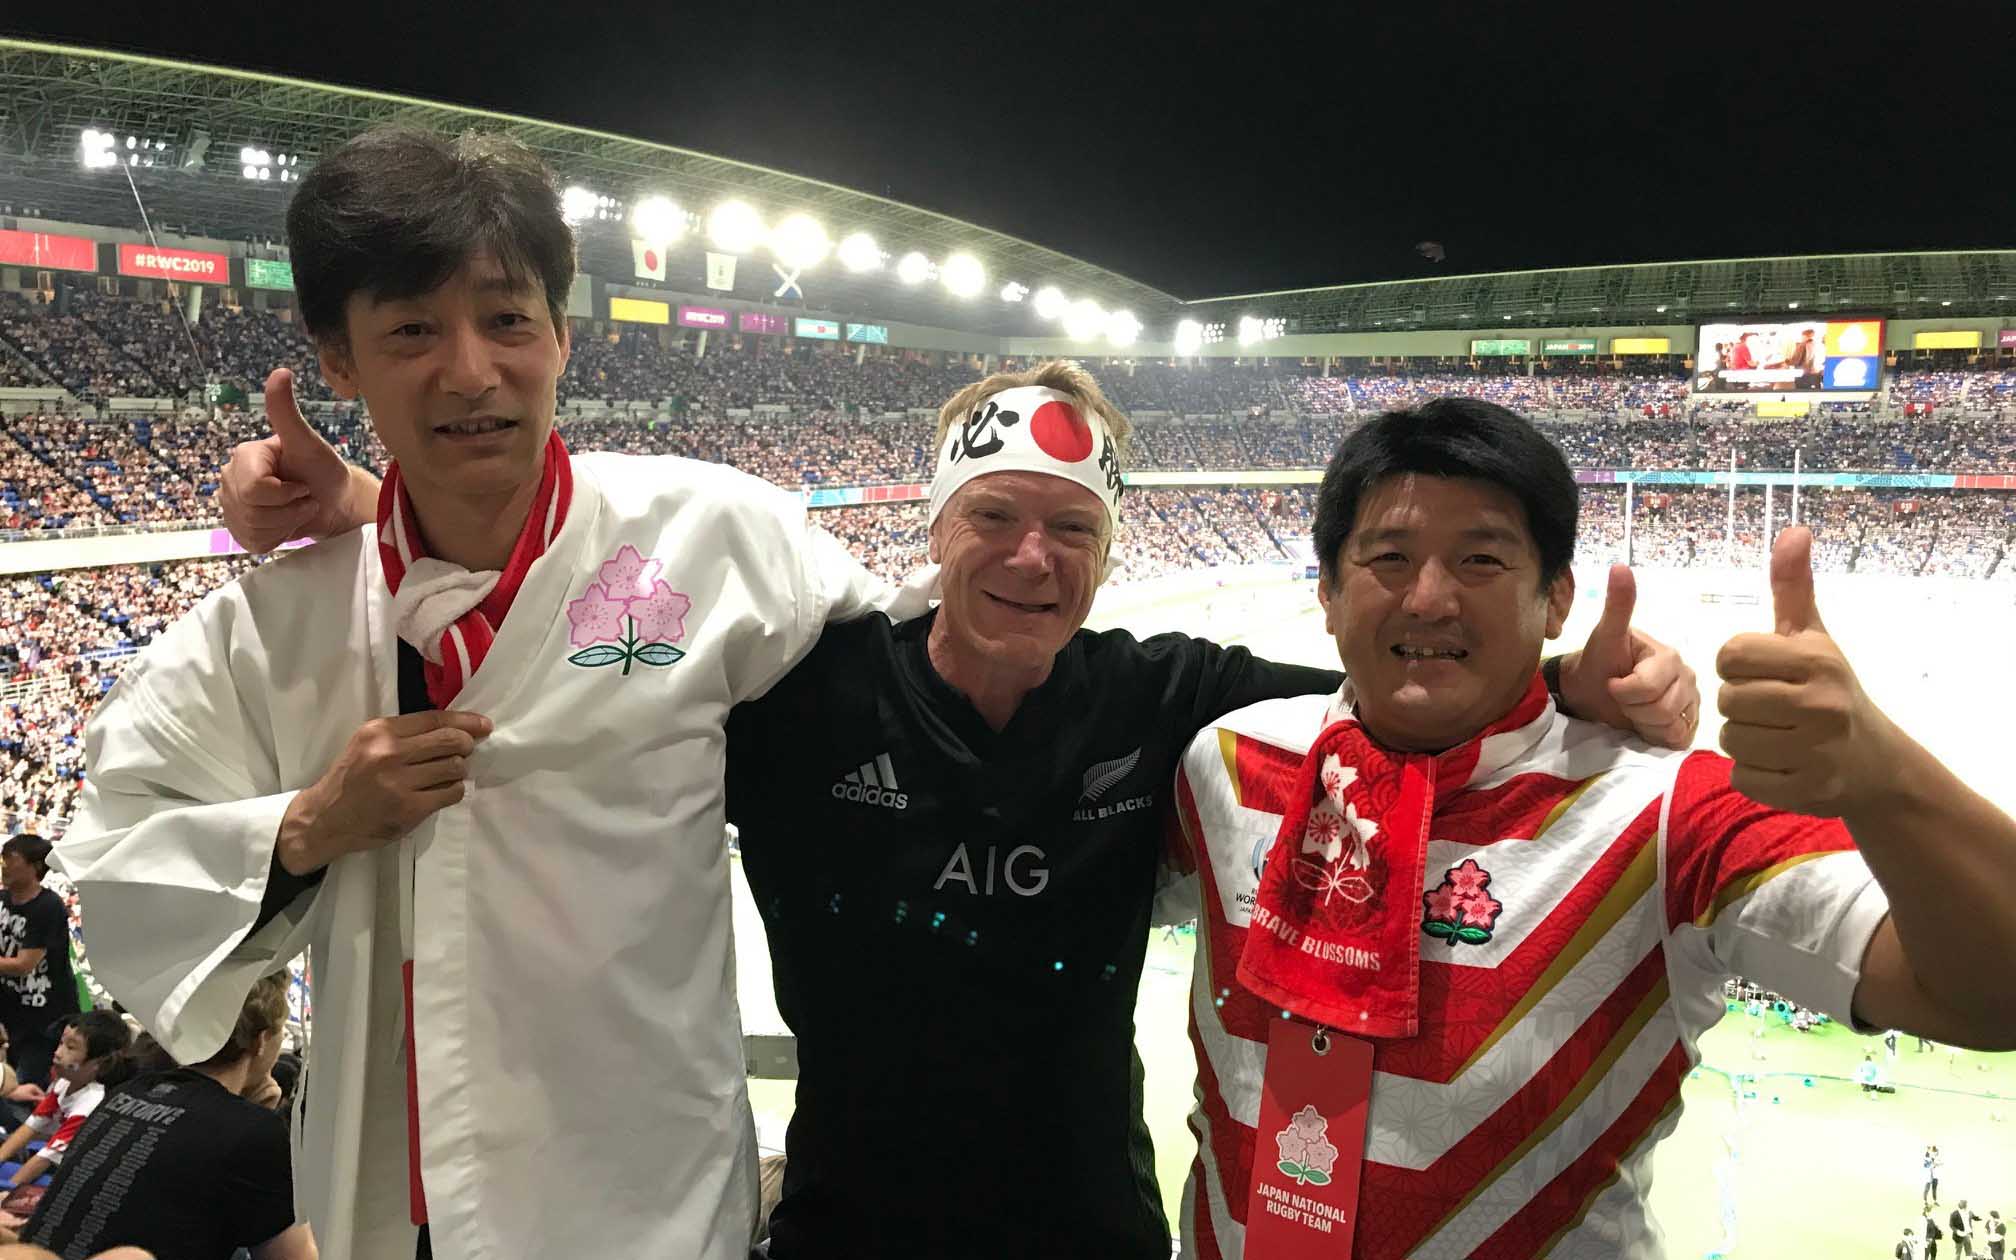 Steve Caunce - Rugby World Cup in Japan